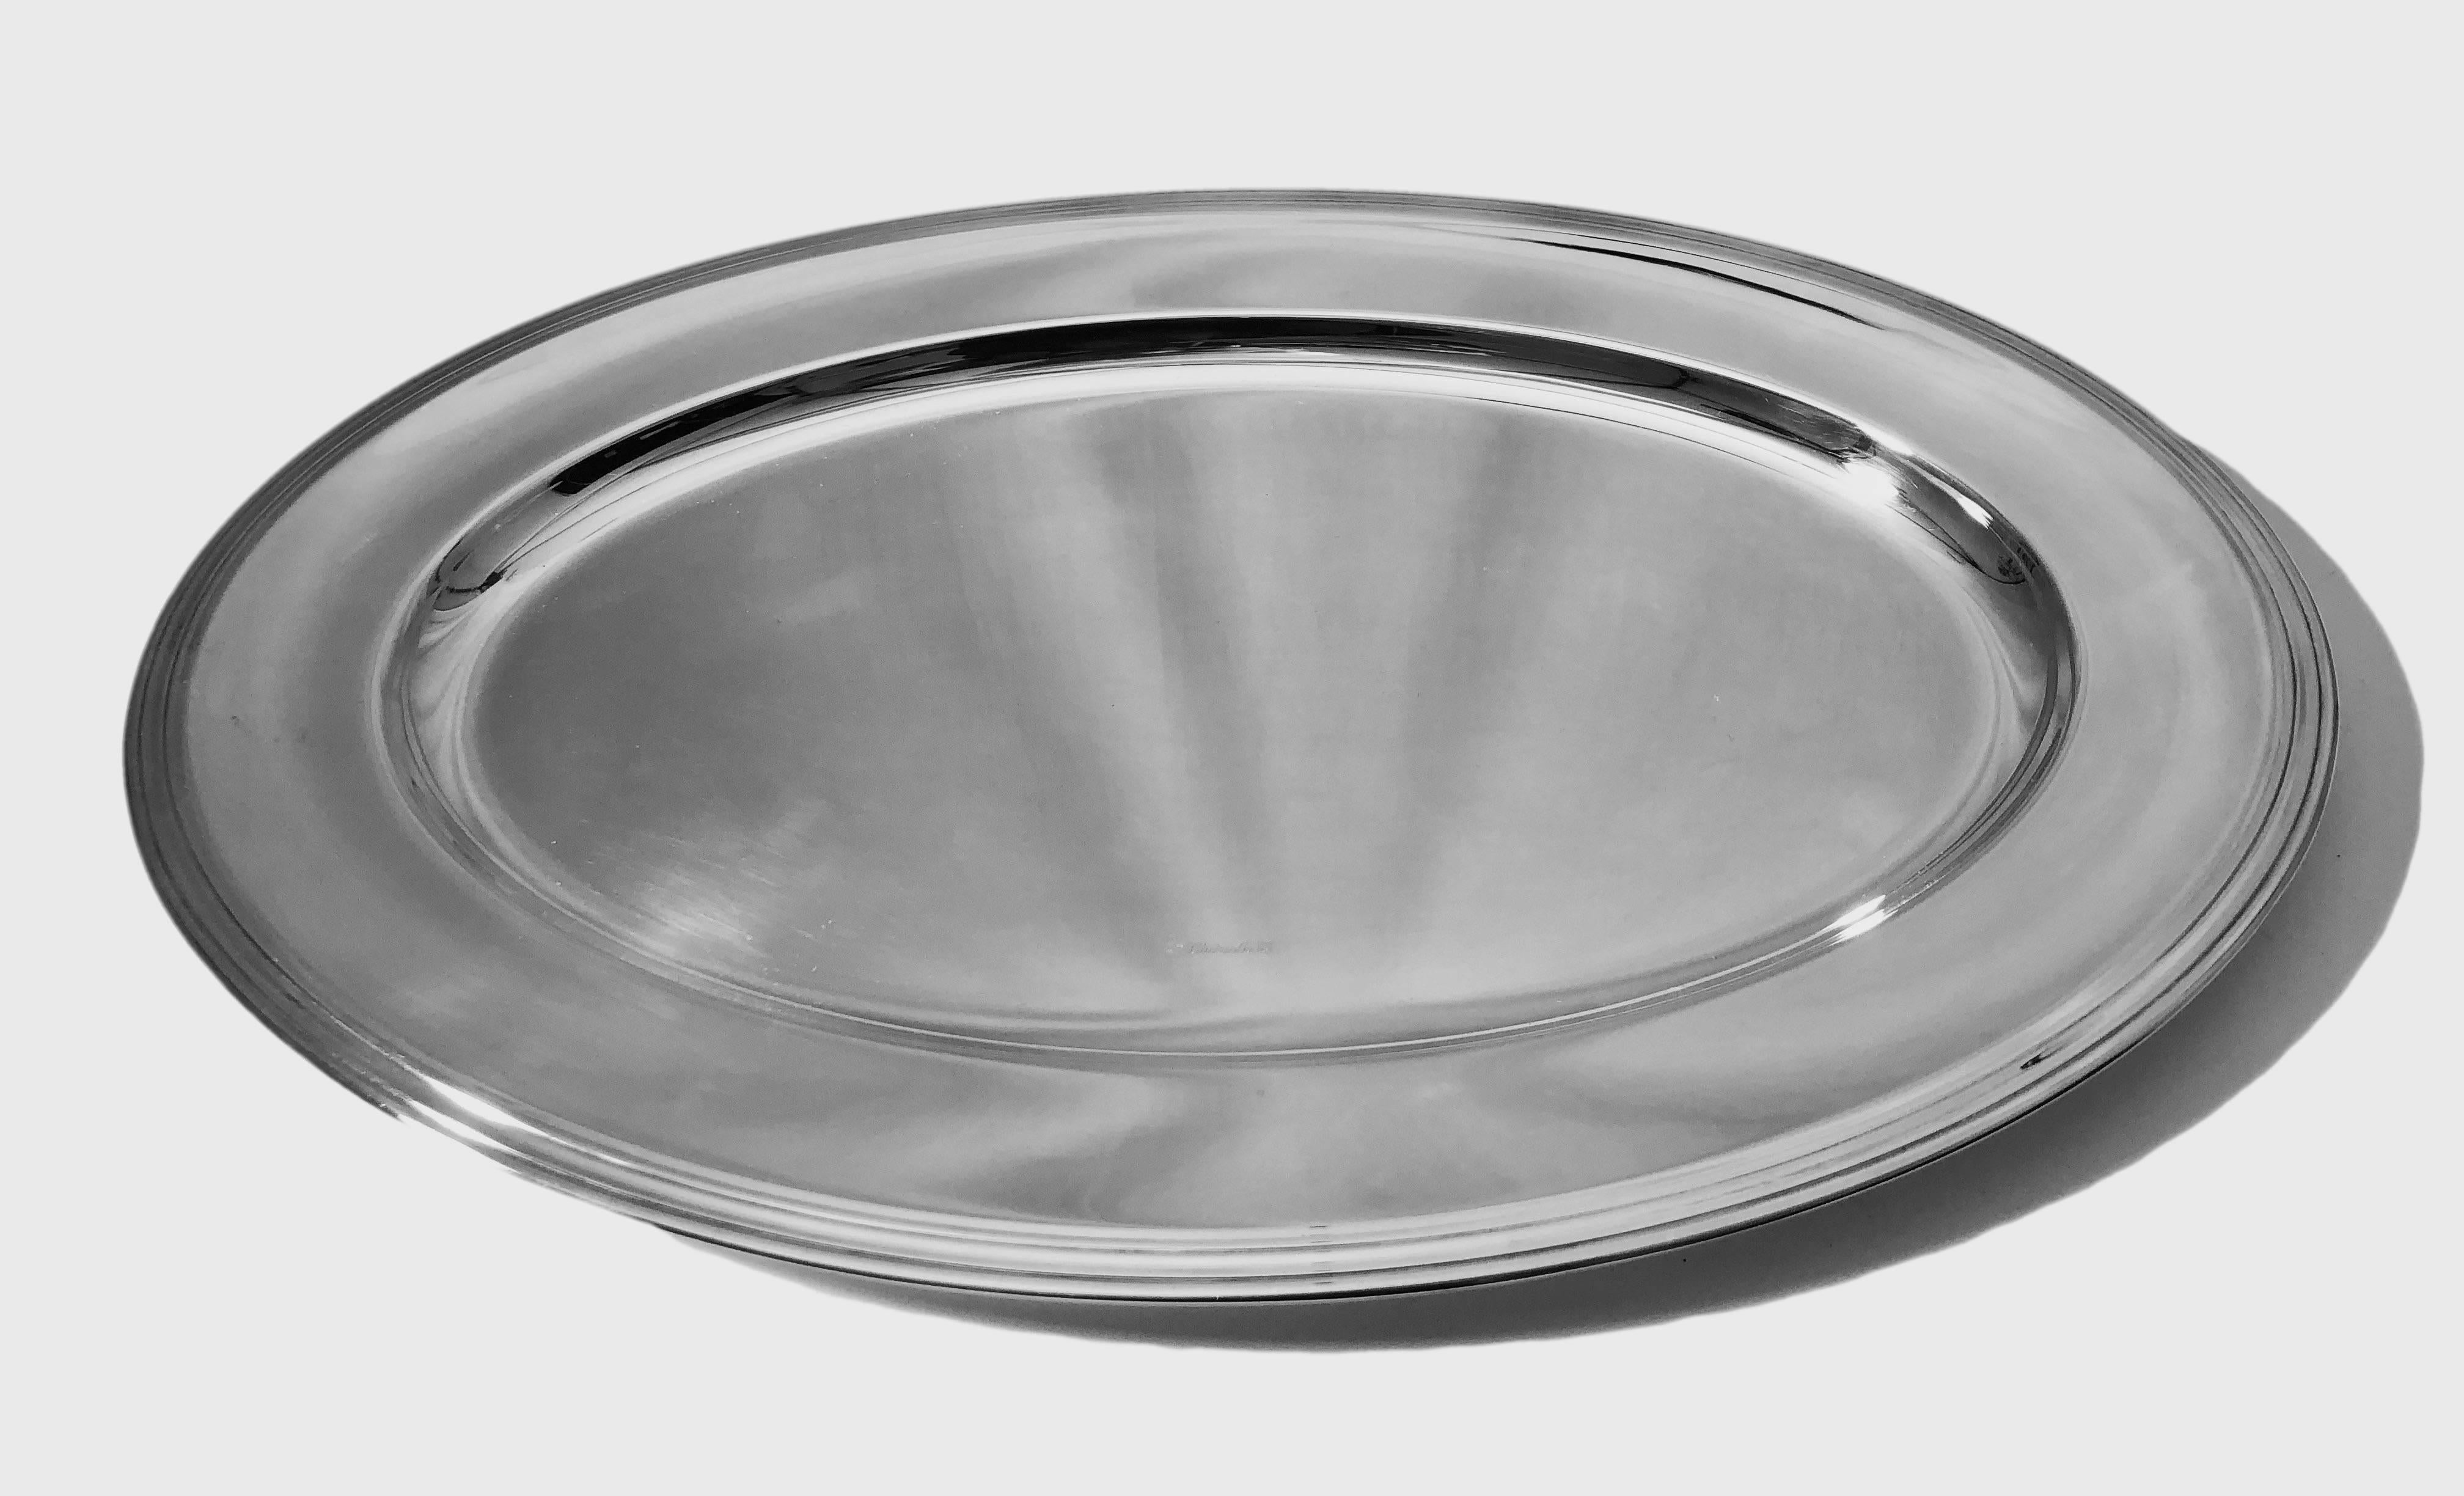 This Christofle silver plated oval platter is the model Clery, very pure and elegant lines.
It has never been used and is in it's original box.

 